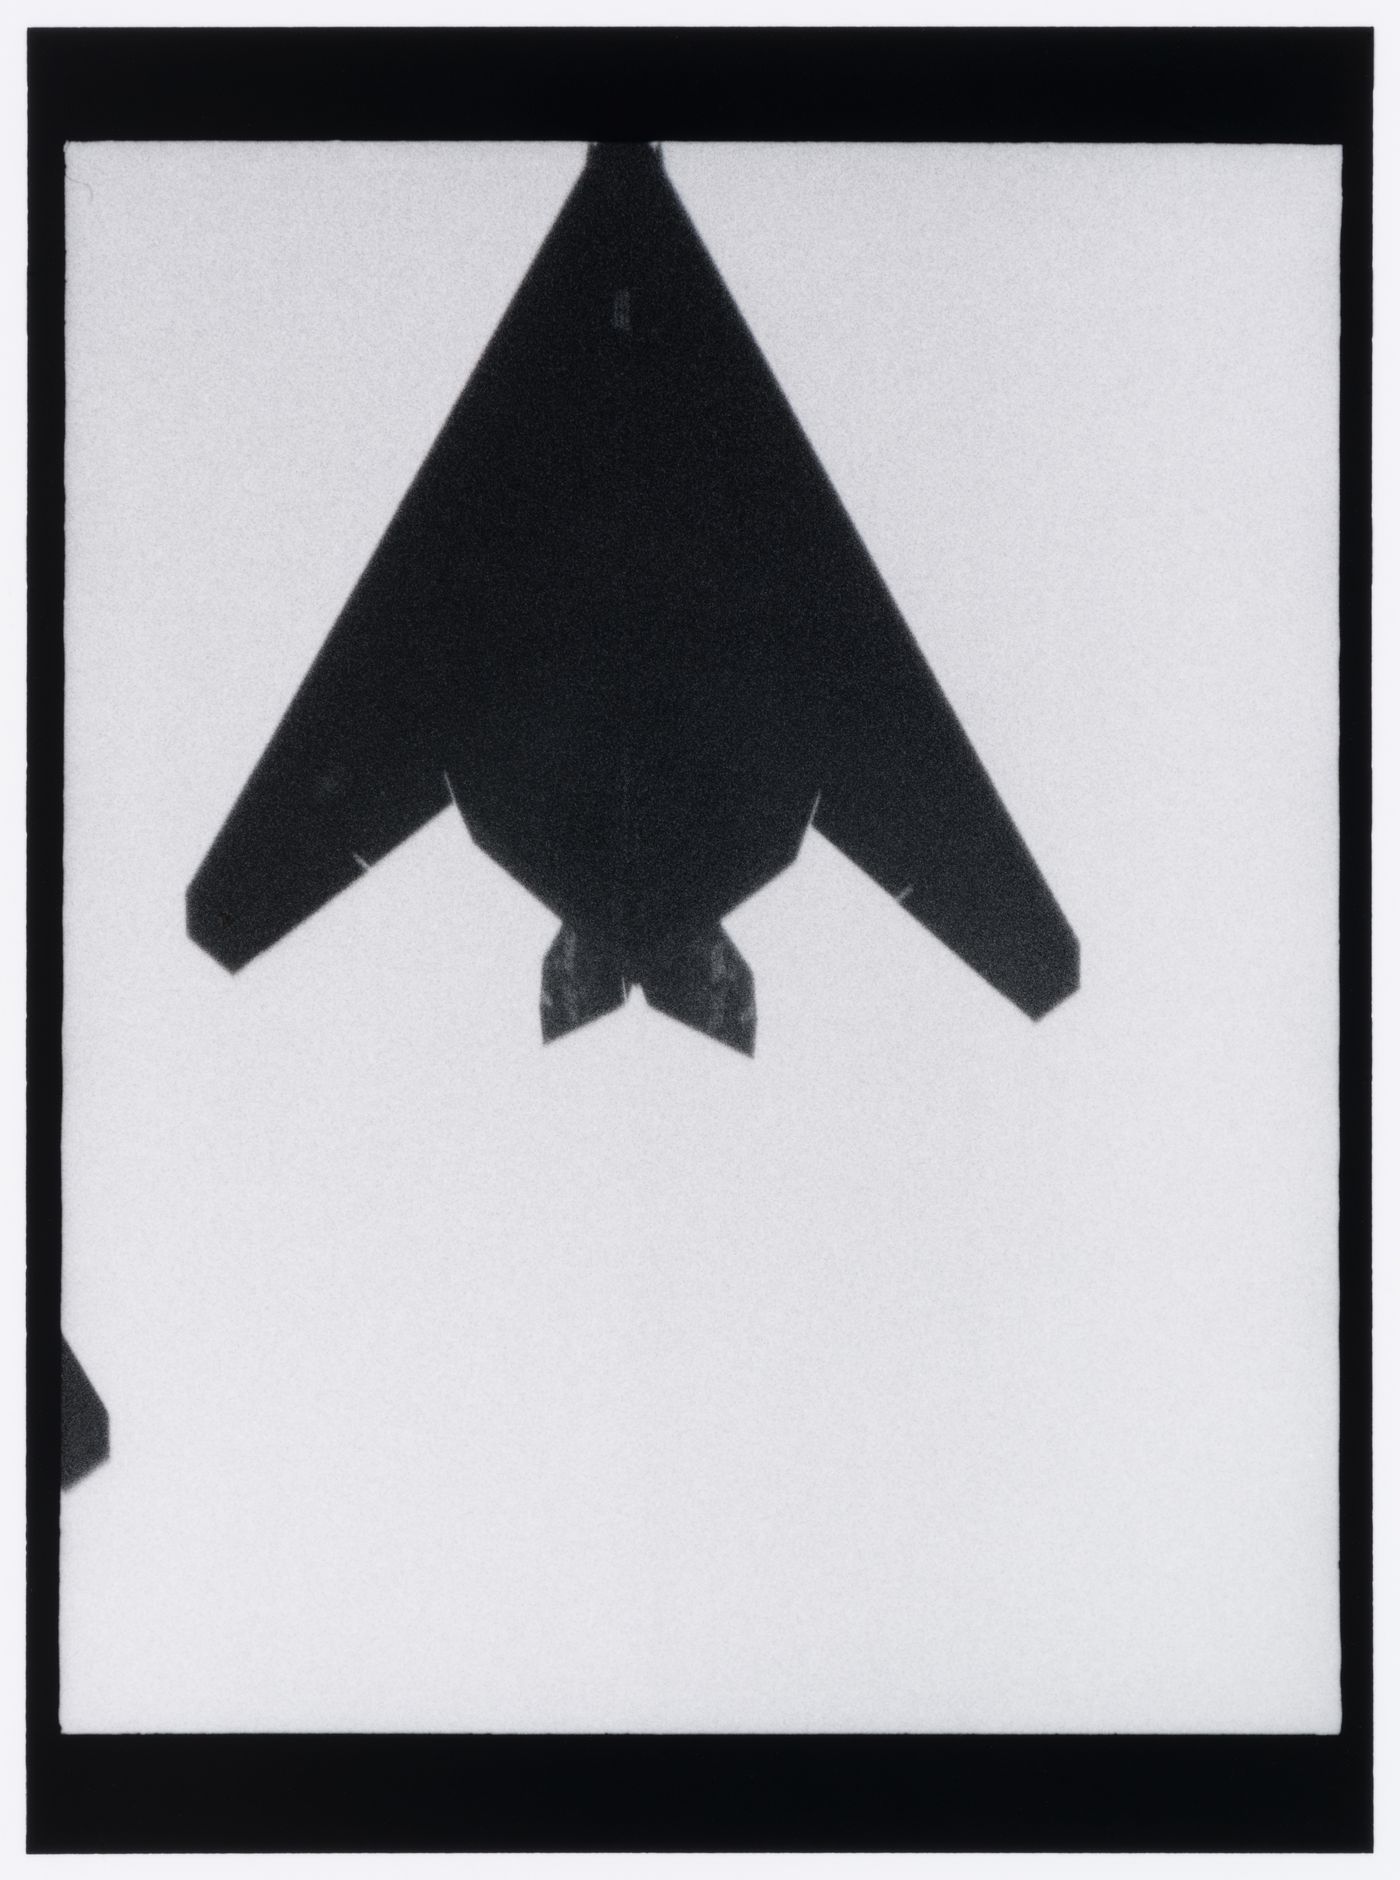 View of a Lockheed F-117 stealth fighter in flight, Washington D.C., United States, from the series "Empire"